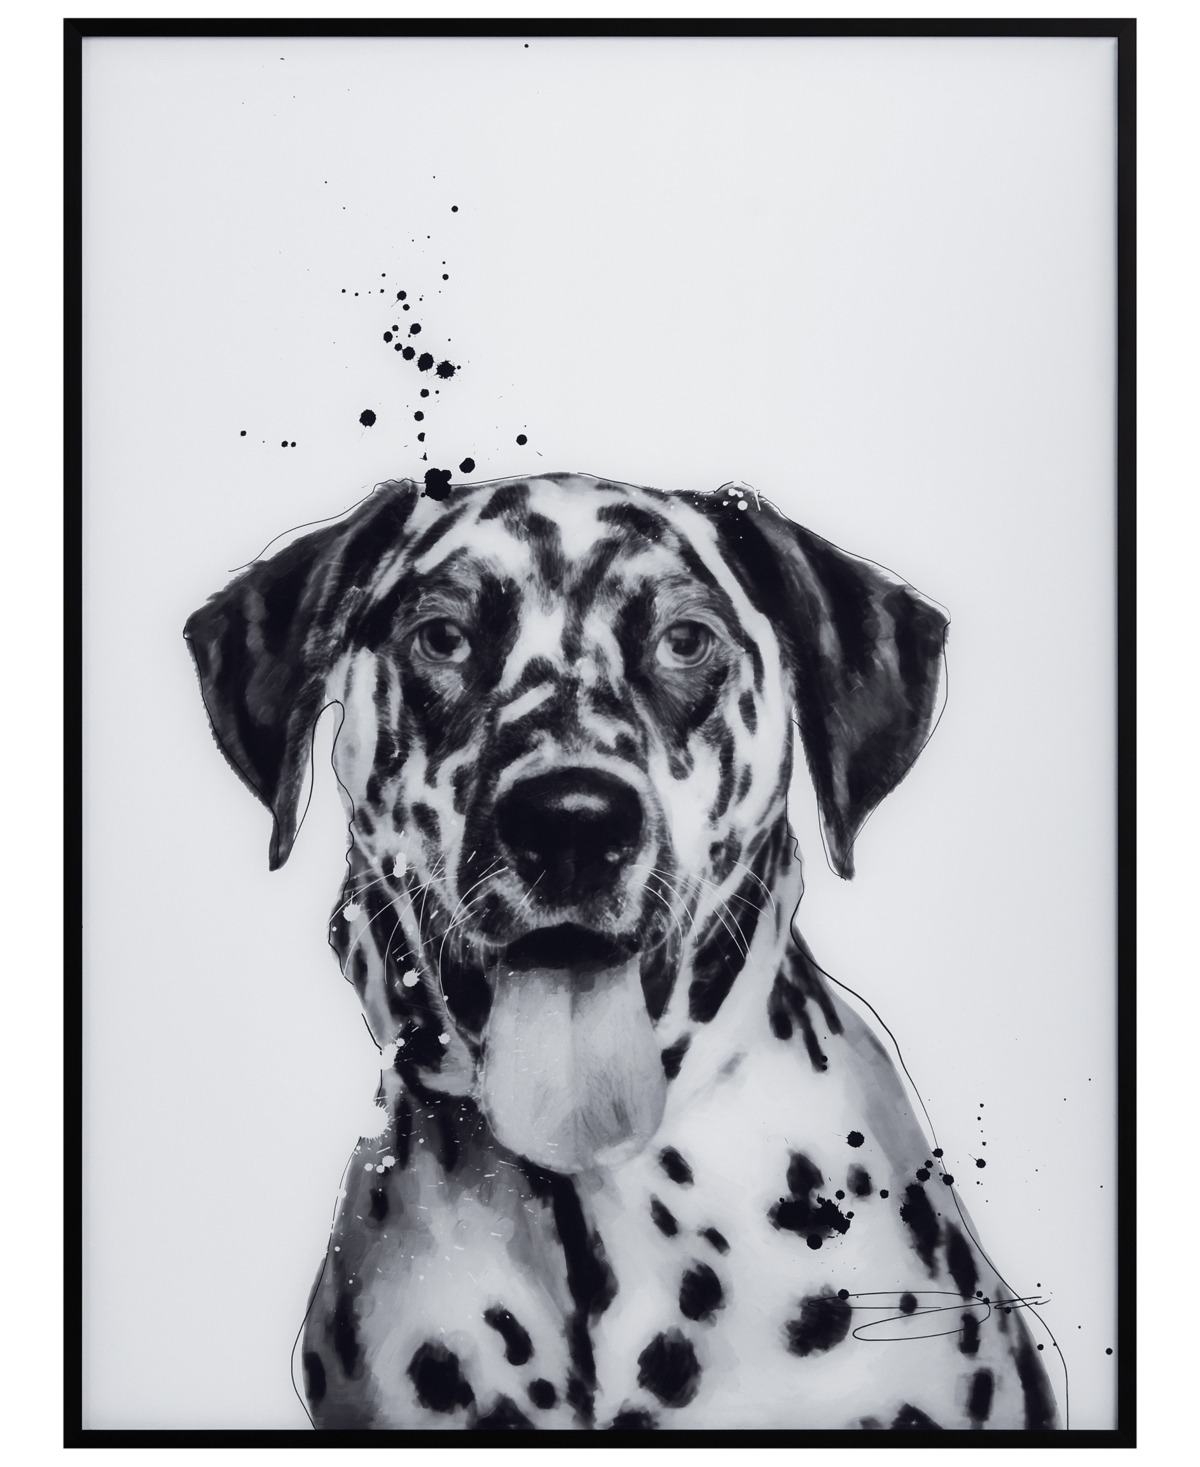 Empire Art Direct "dalmatian" Pet Paintings On Printed Glass Encased With A Black Anodized Frame, 24" X 18" X 1" In Black And White